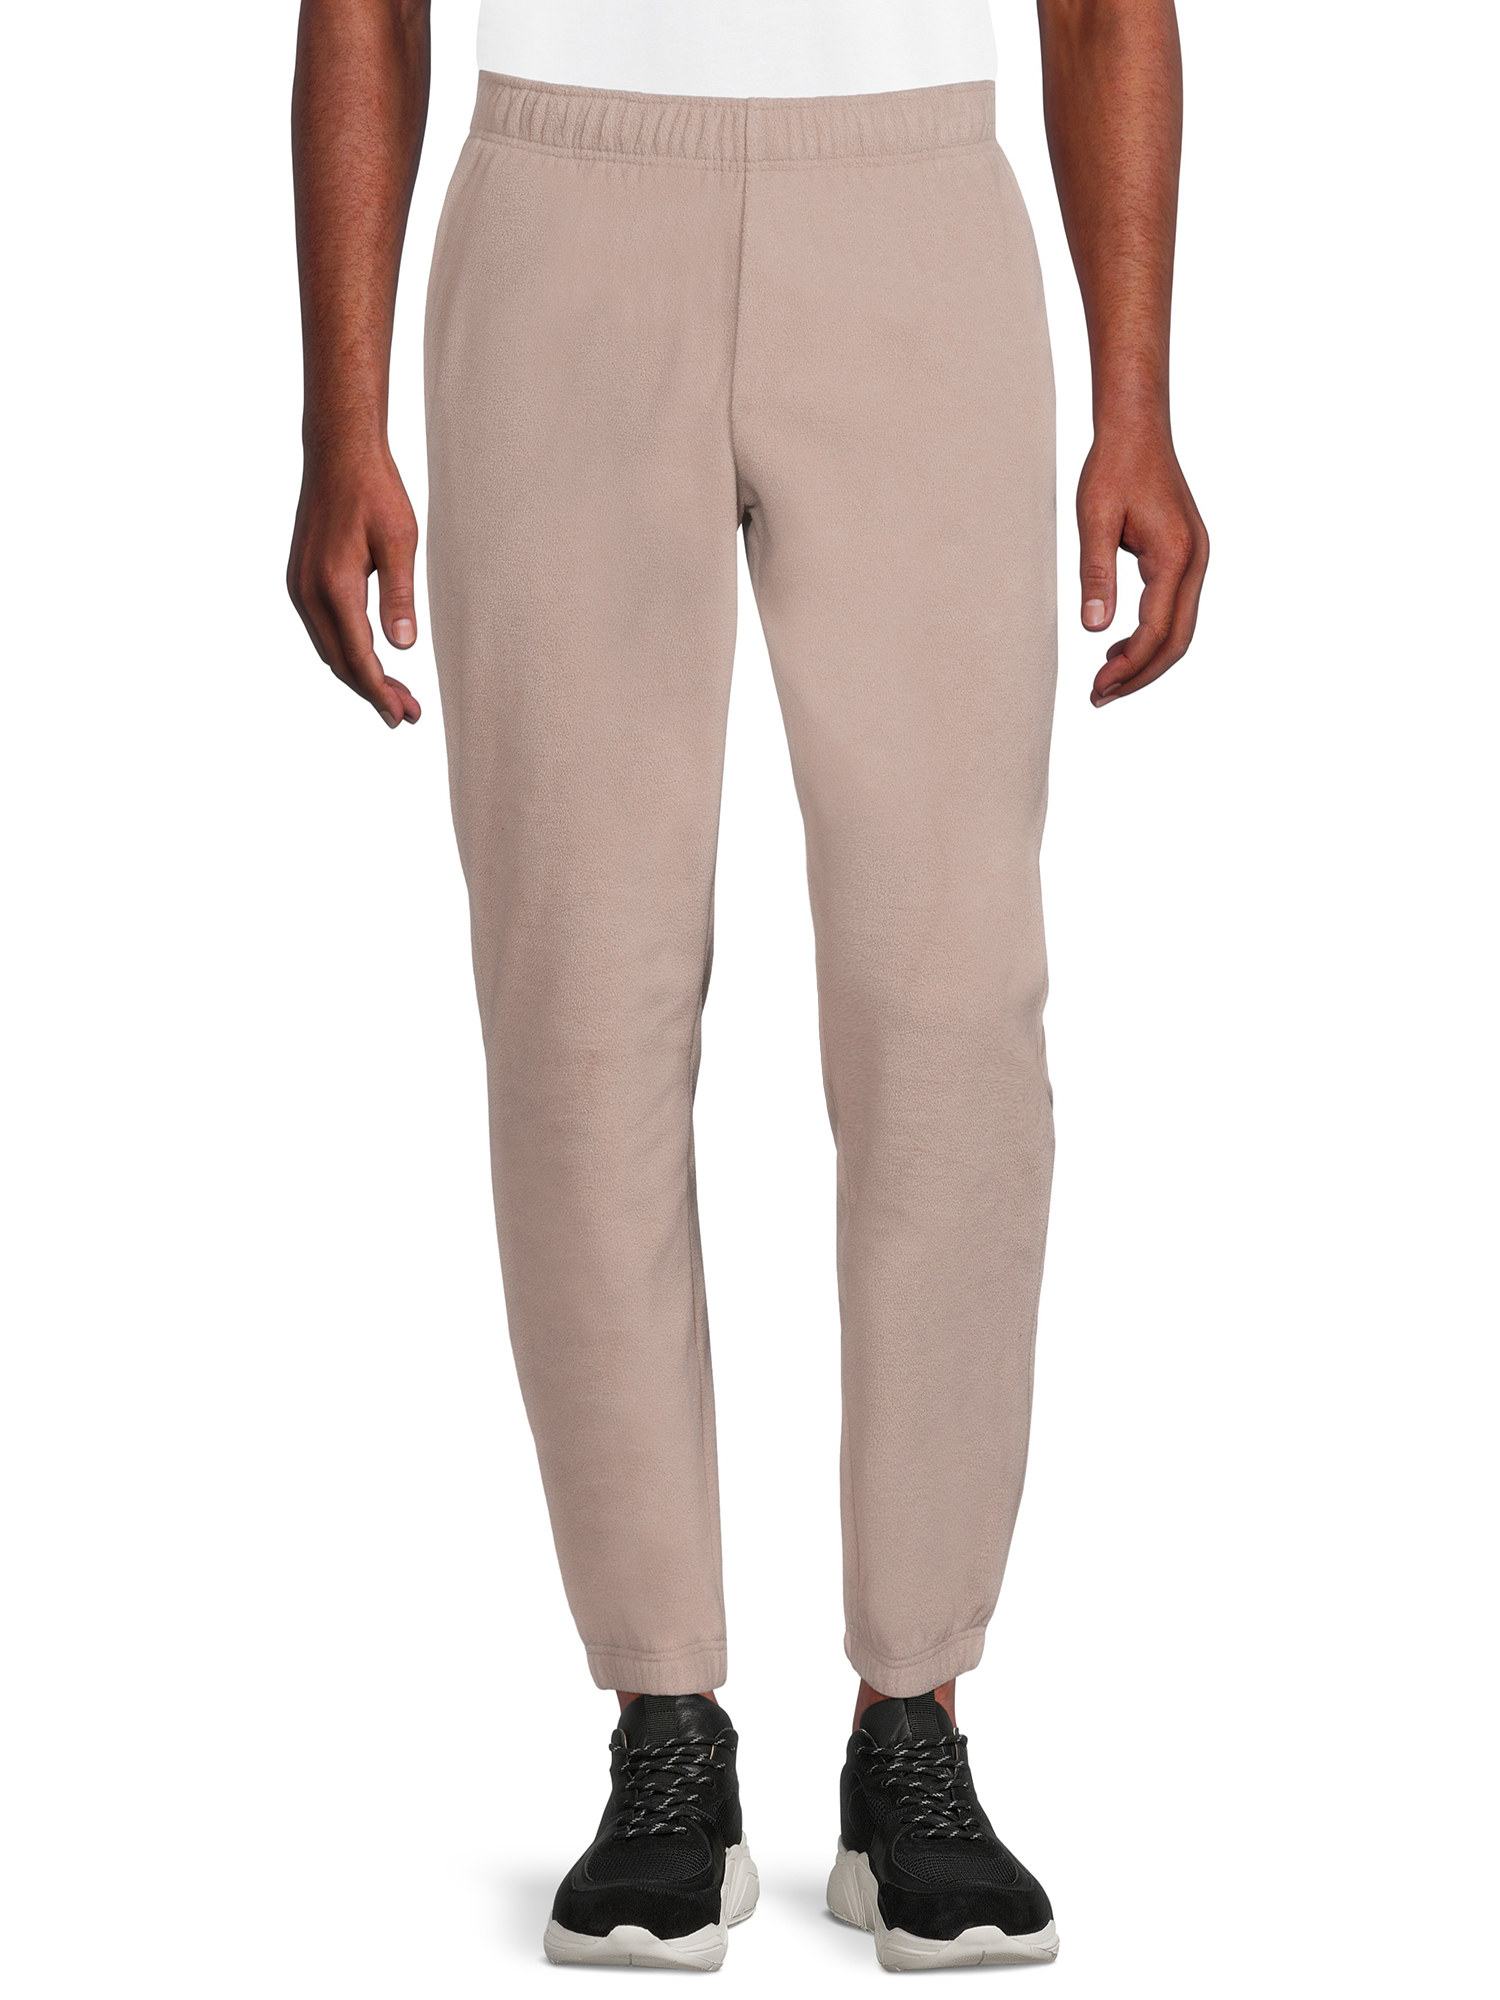 Russell Men's and Big Men's Microfleece Jogger Pants, Sizes S-3XL - image 1 of 5